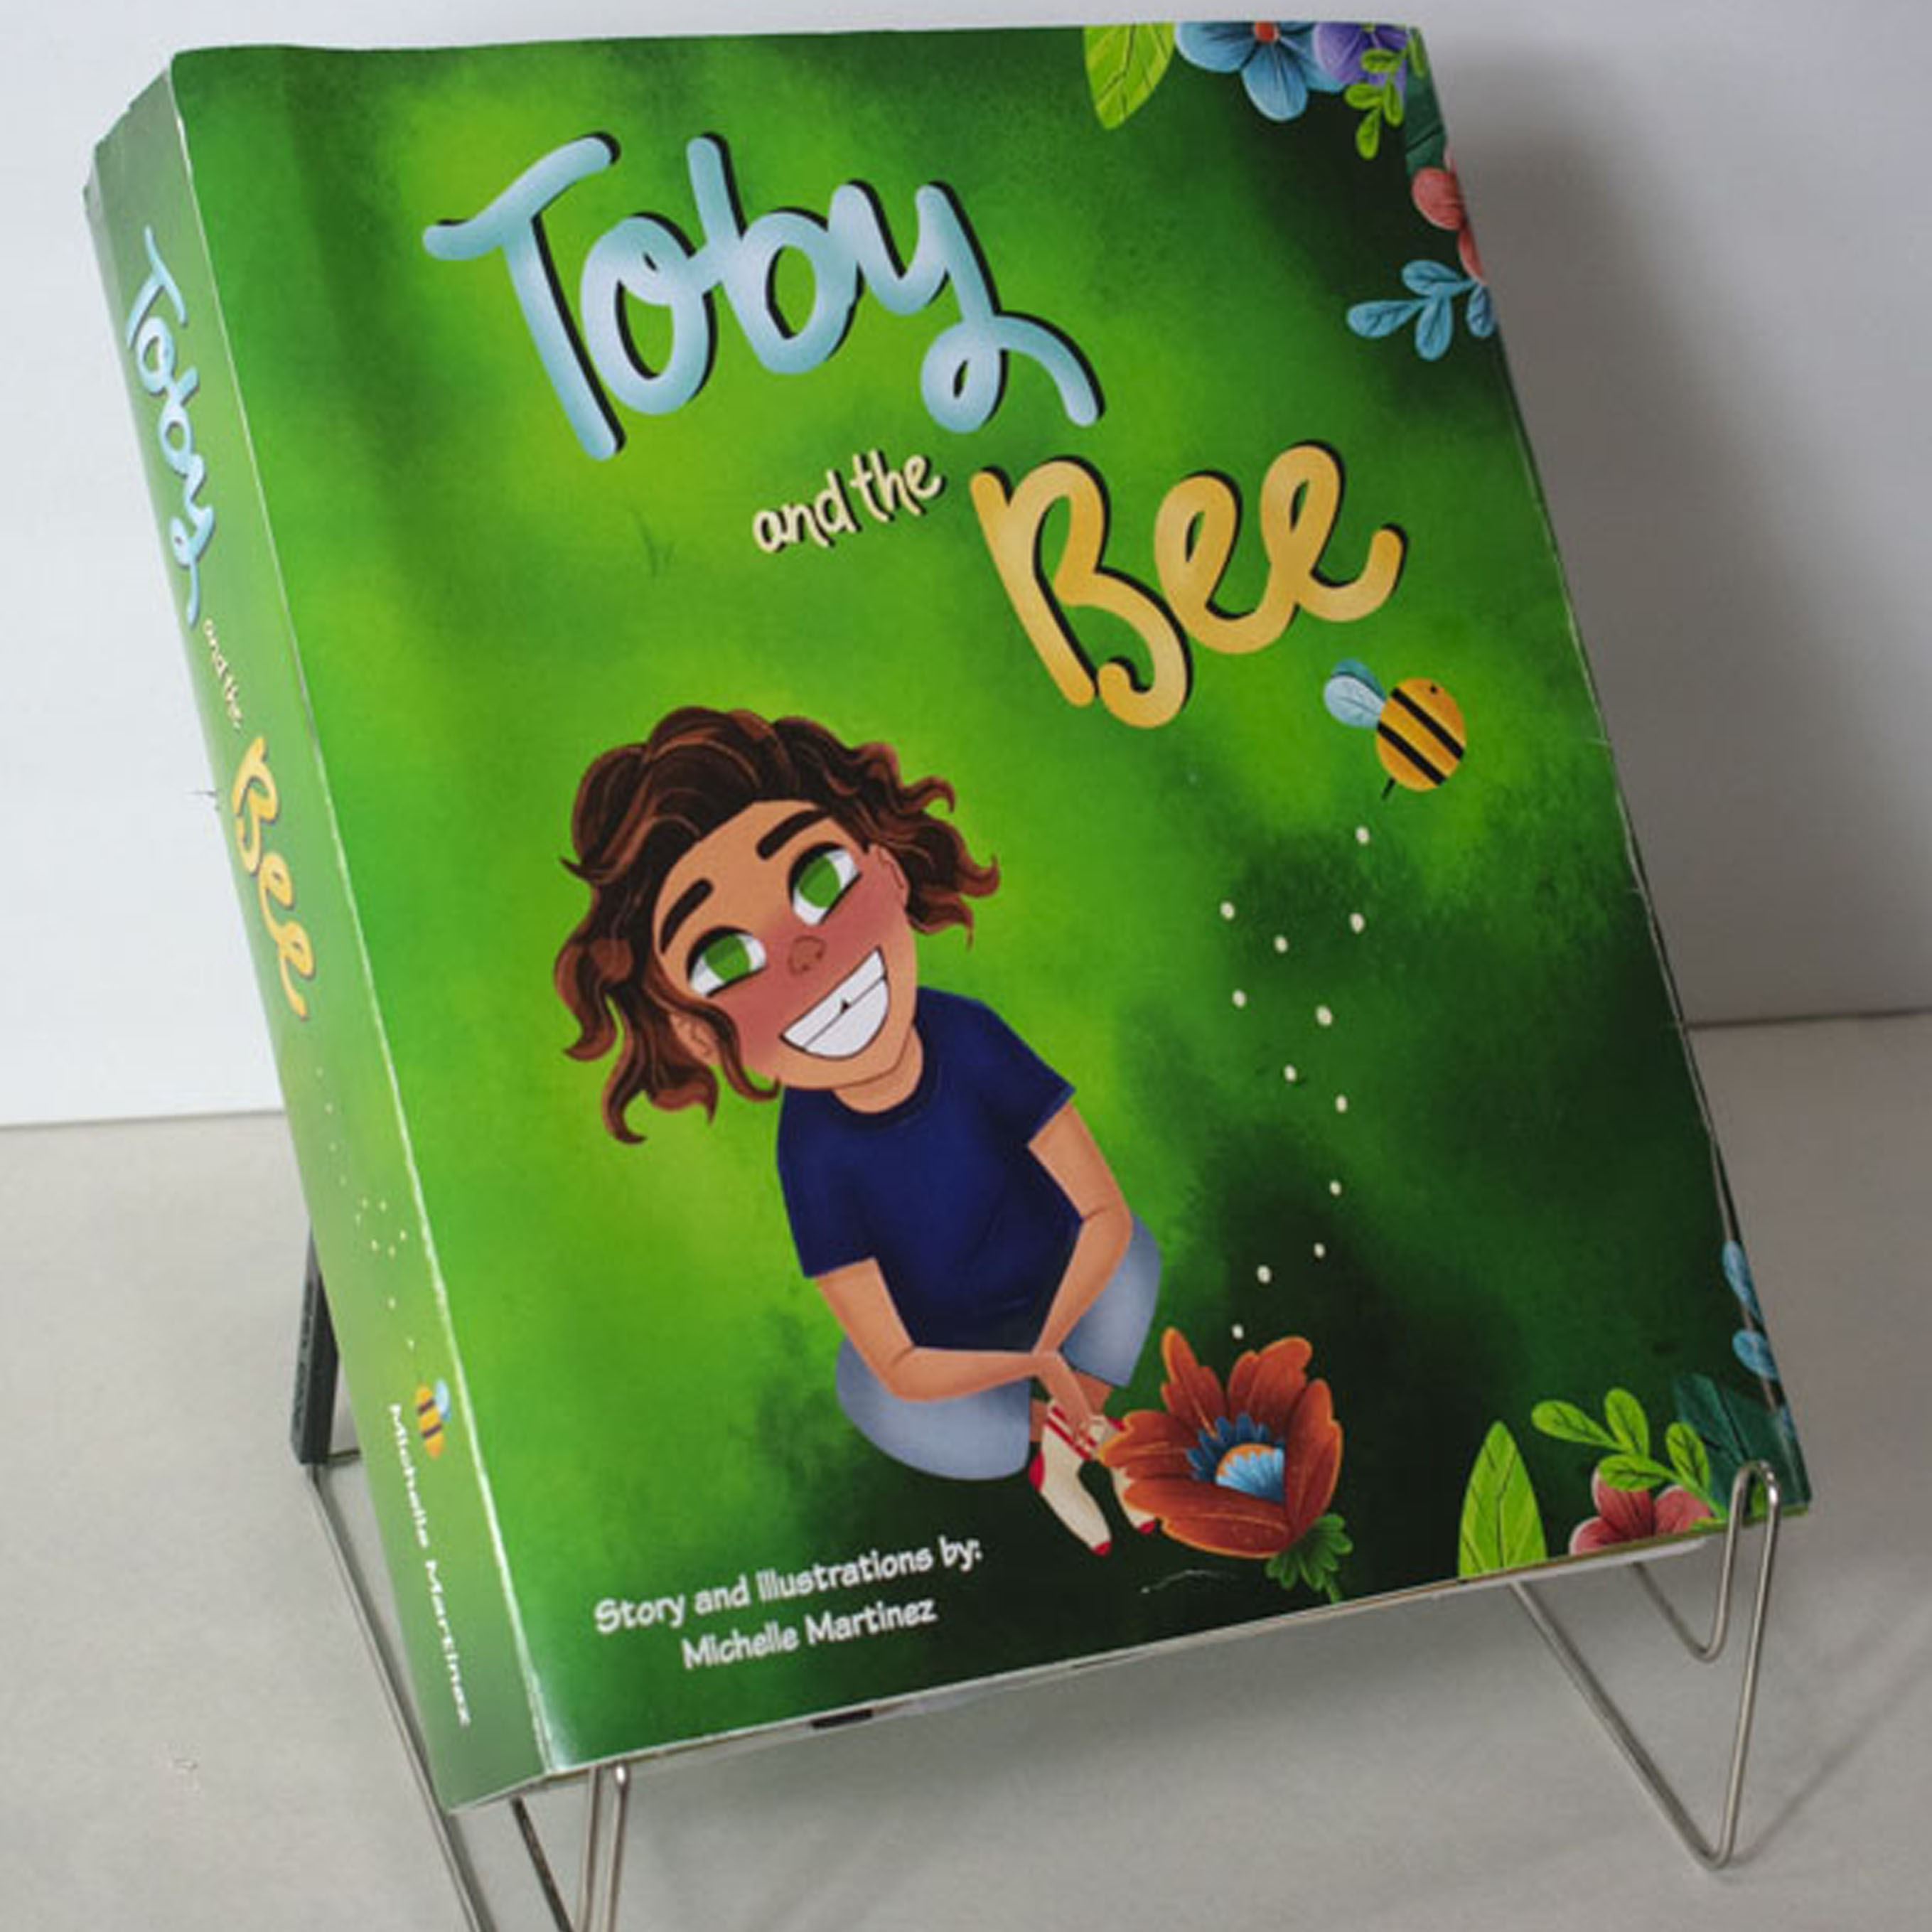 Toby and the Bee by Michelle Martinez